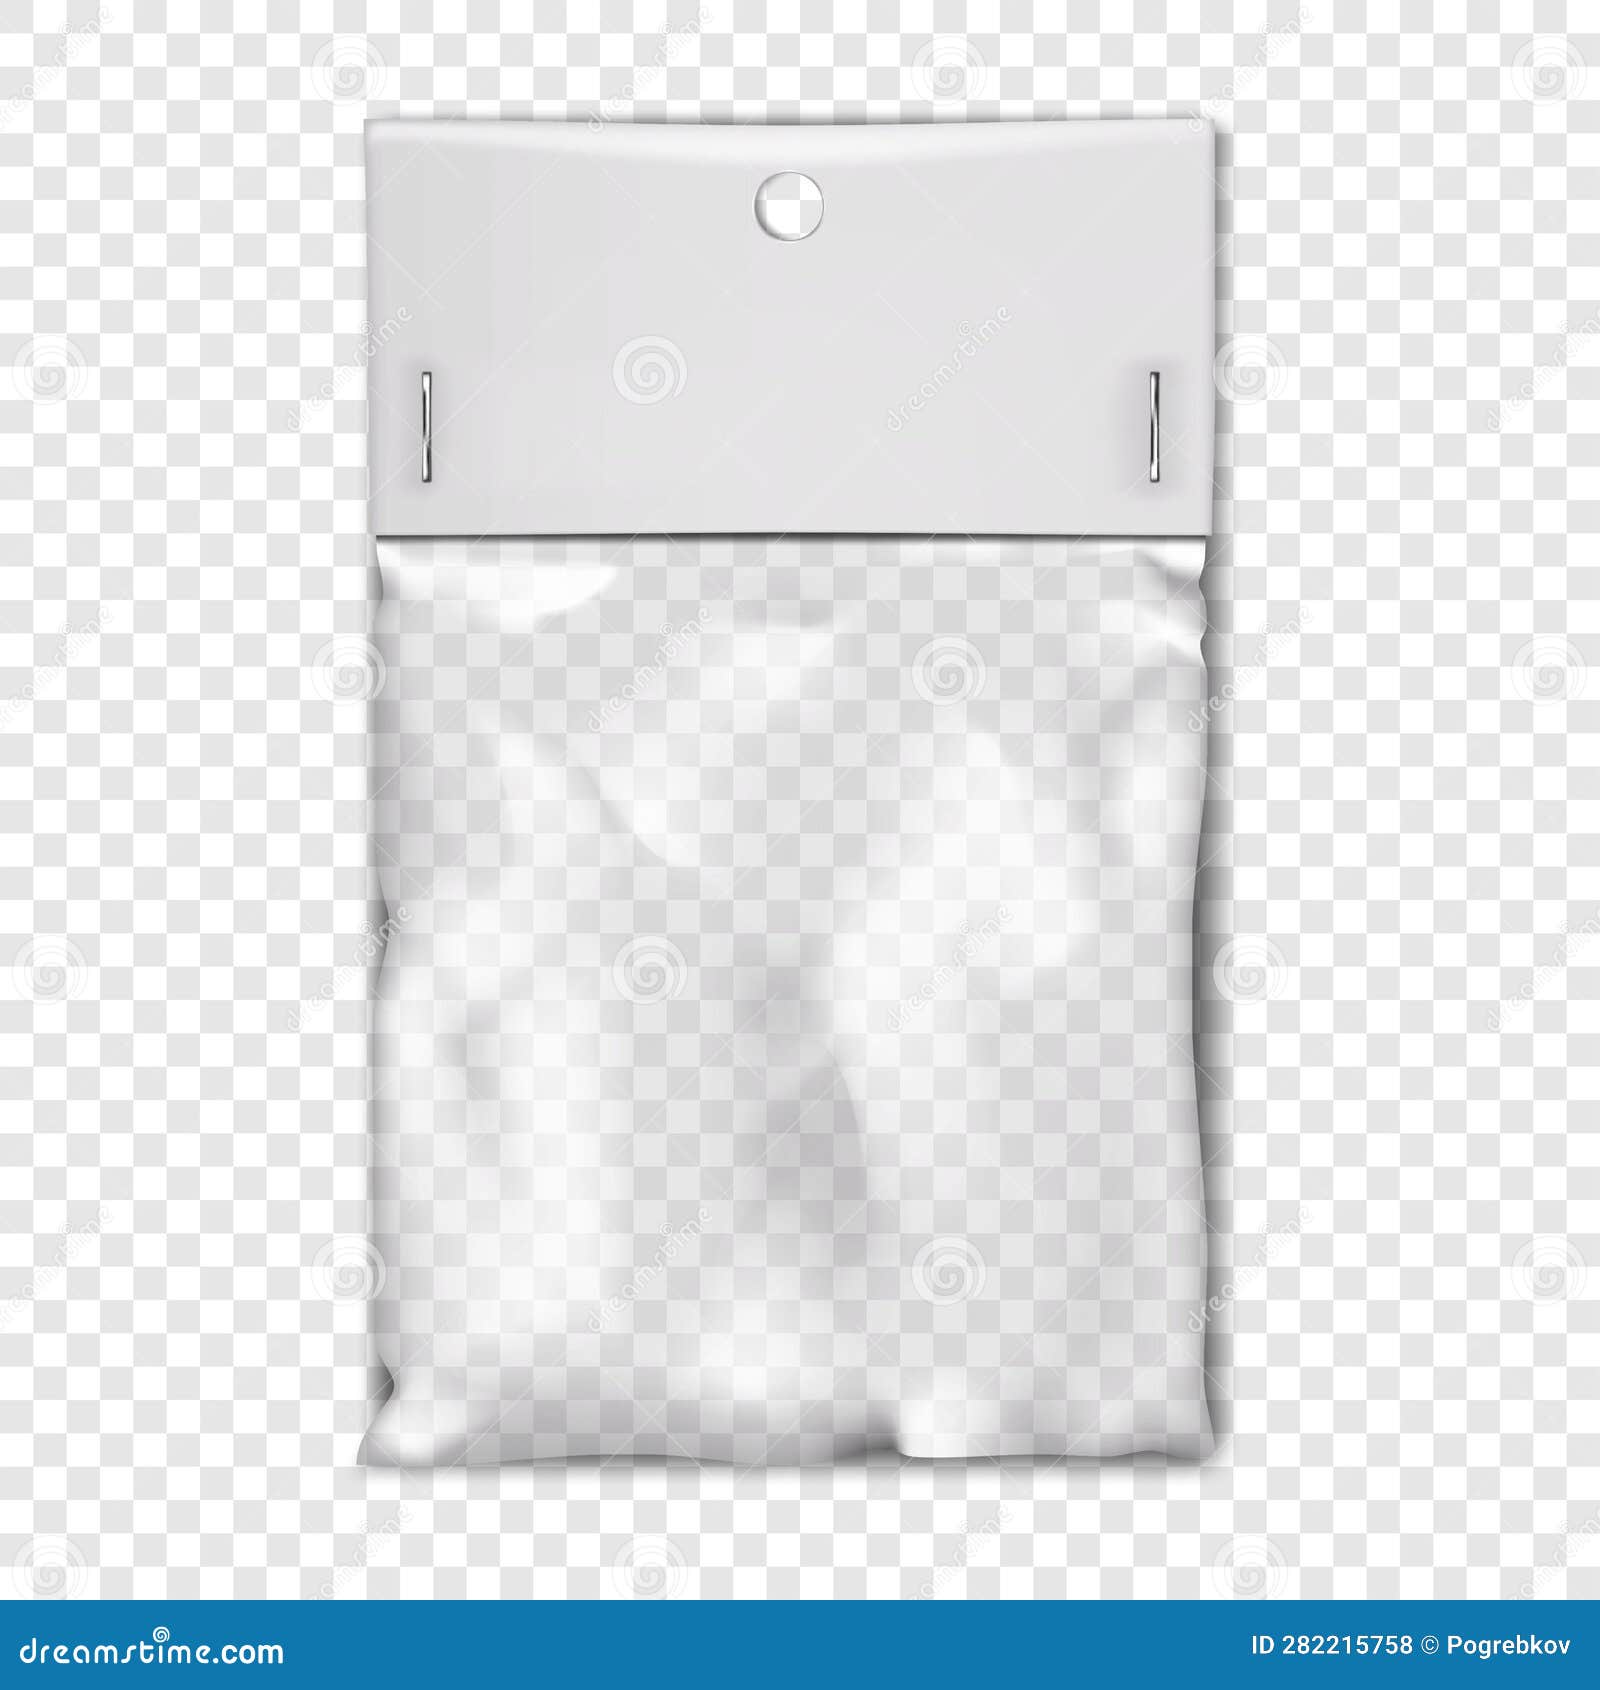 Empty Clear Plastic Pouch Bag With White Blank Paper Label Top And